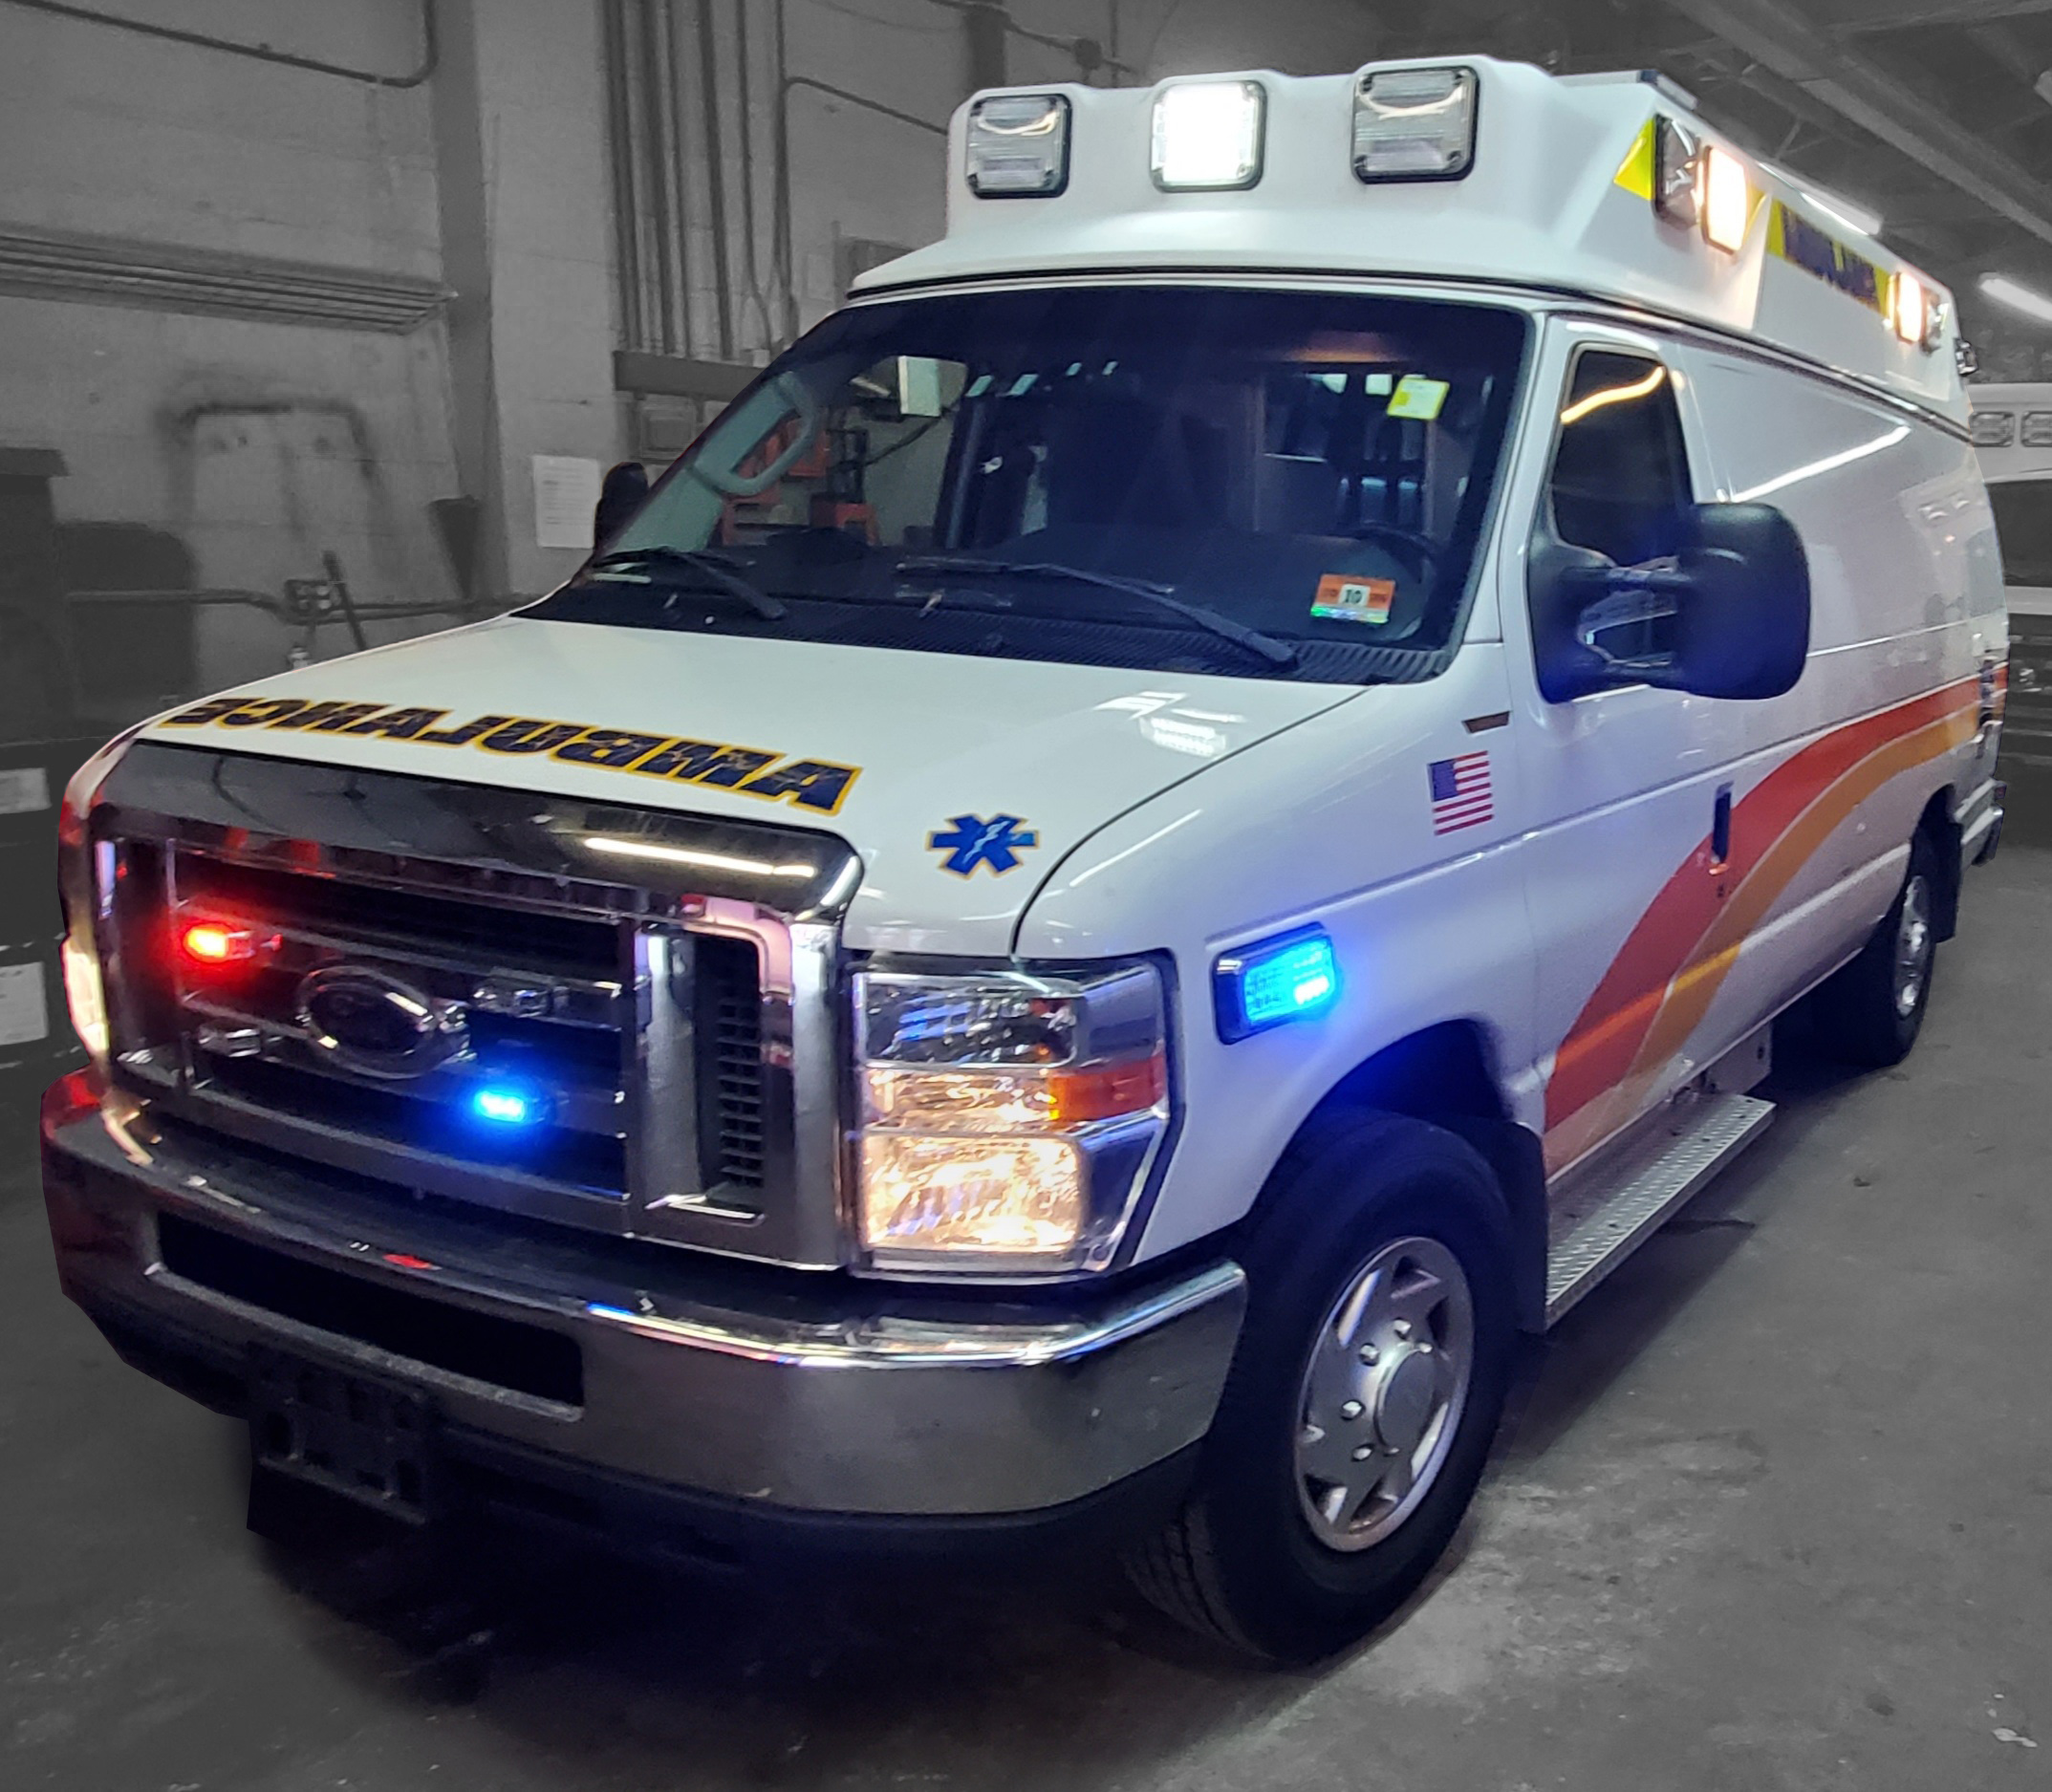 Ford Gas Type 2 AEV Used Ambulance For Sale 05